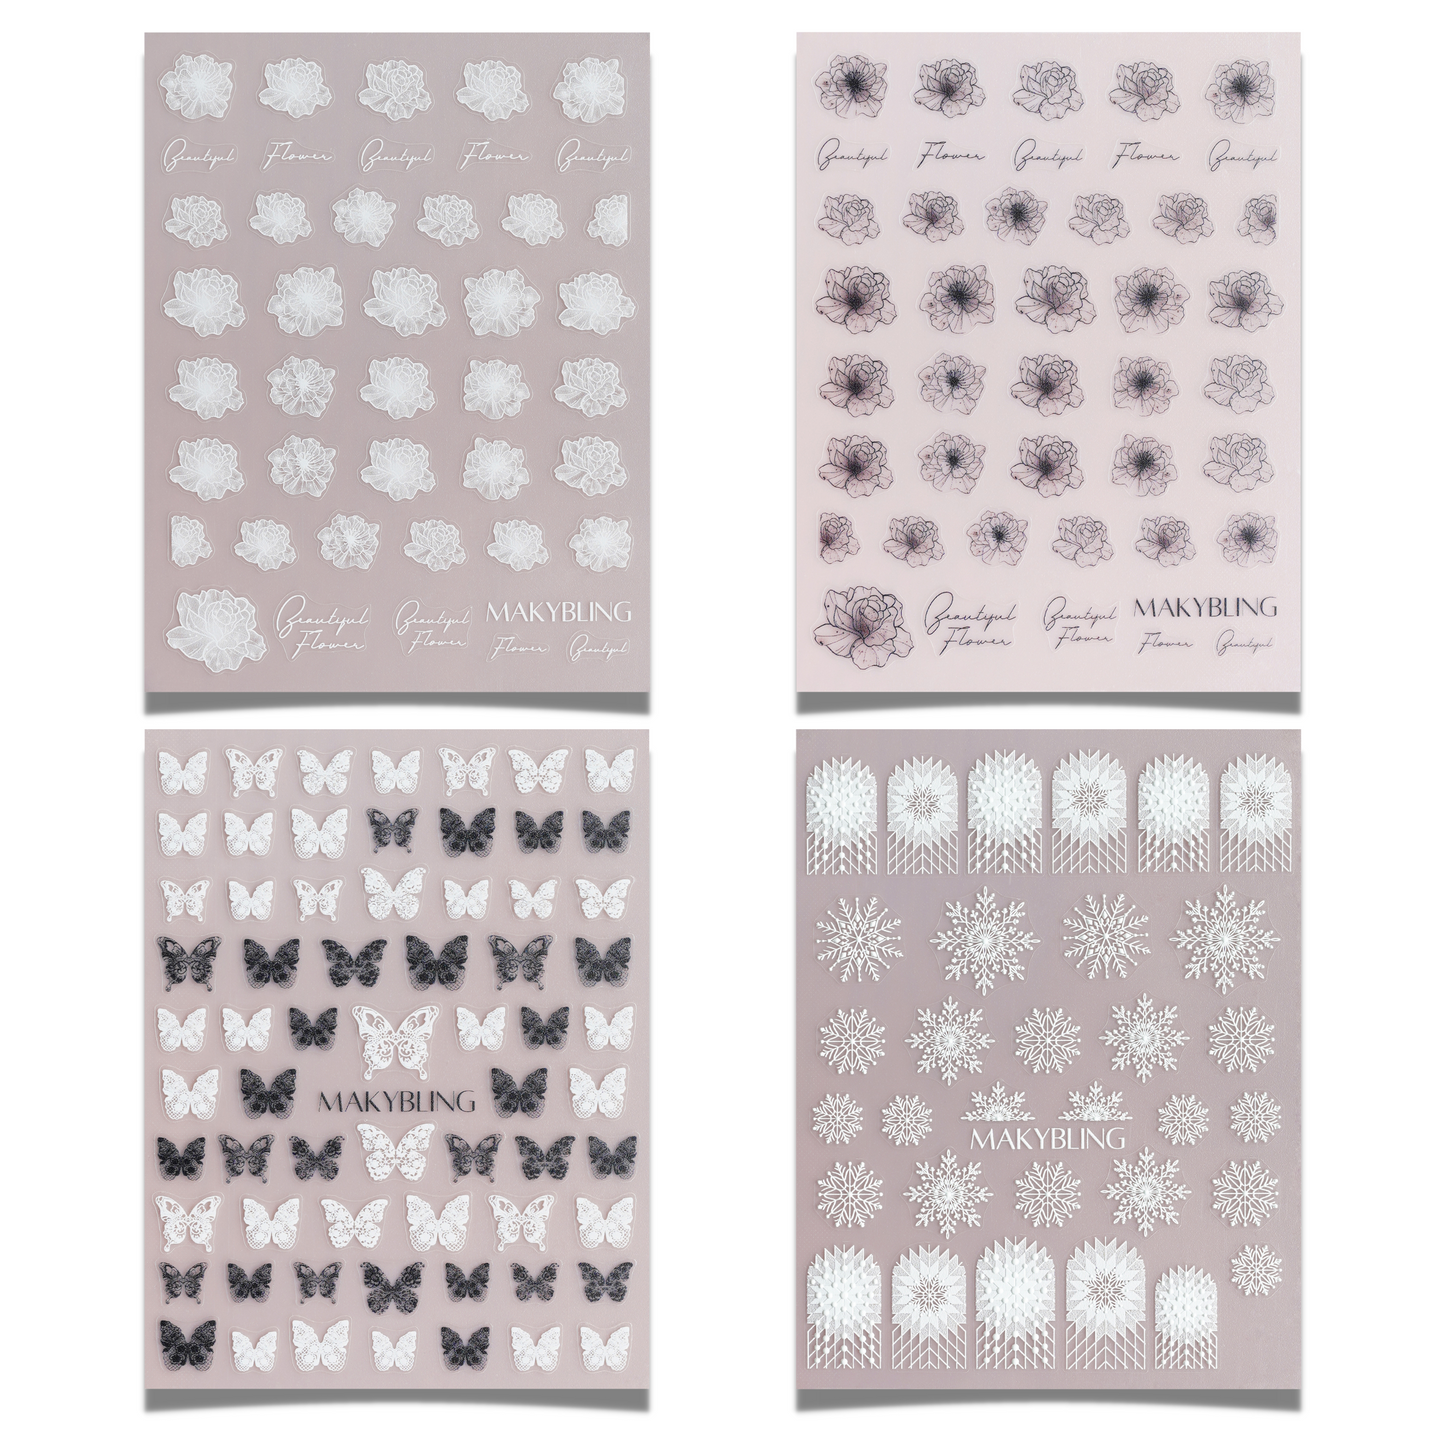 Lace Snow Floral Butterfly Nail Stickers Kit